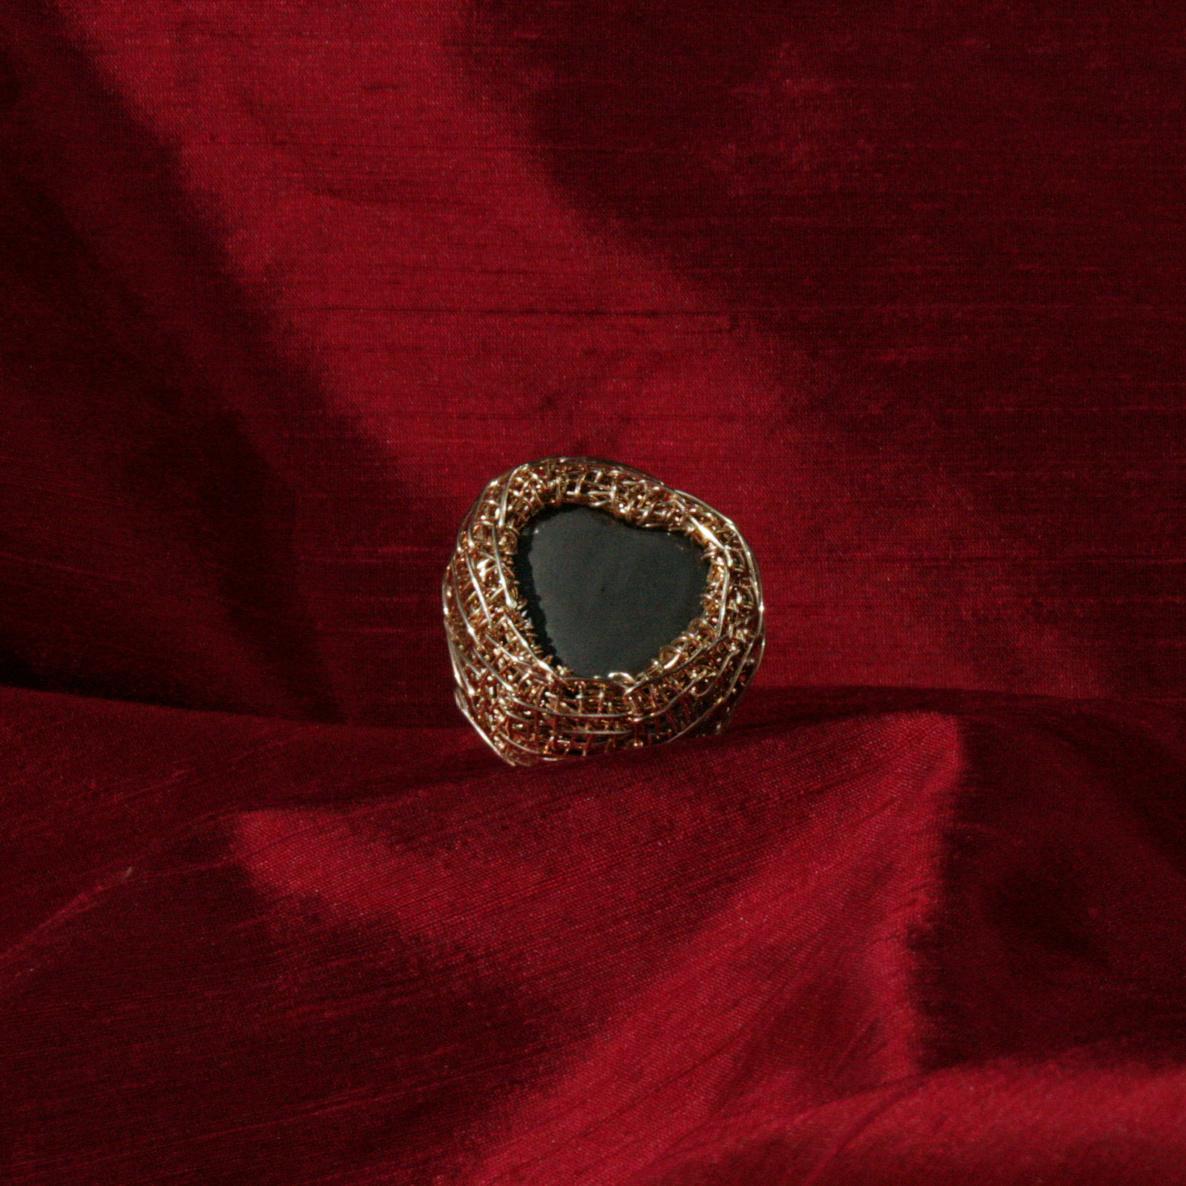 Heart Shaped Grey Stone Statement Cocktail Ring in 14k Gold F. by the Artist For Sale 3